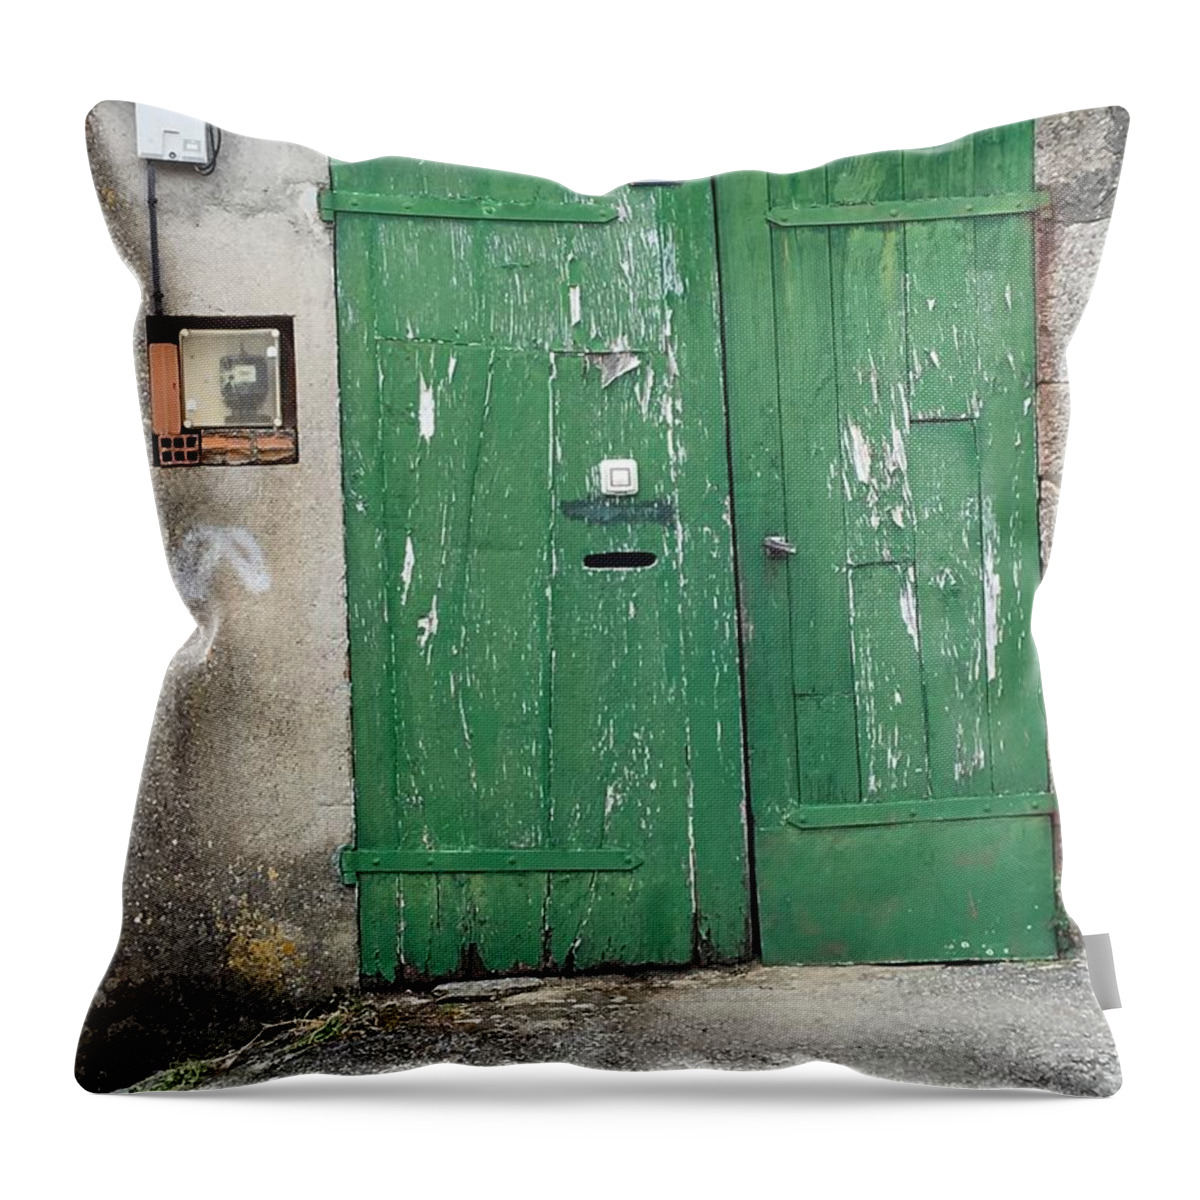 Old Throw Pillow featuring the photograph Spain Door 12 by Cheryl Rhodes